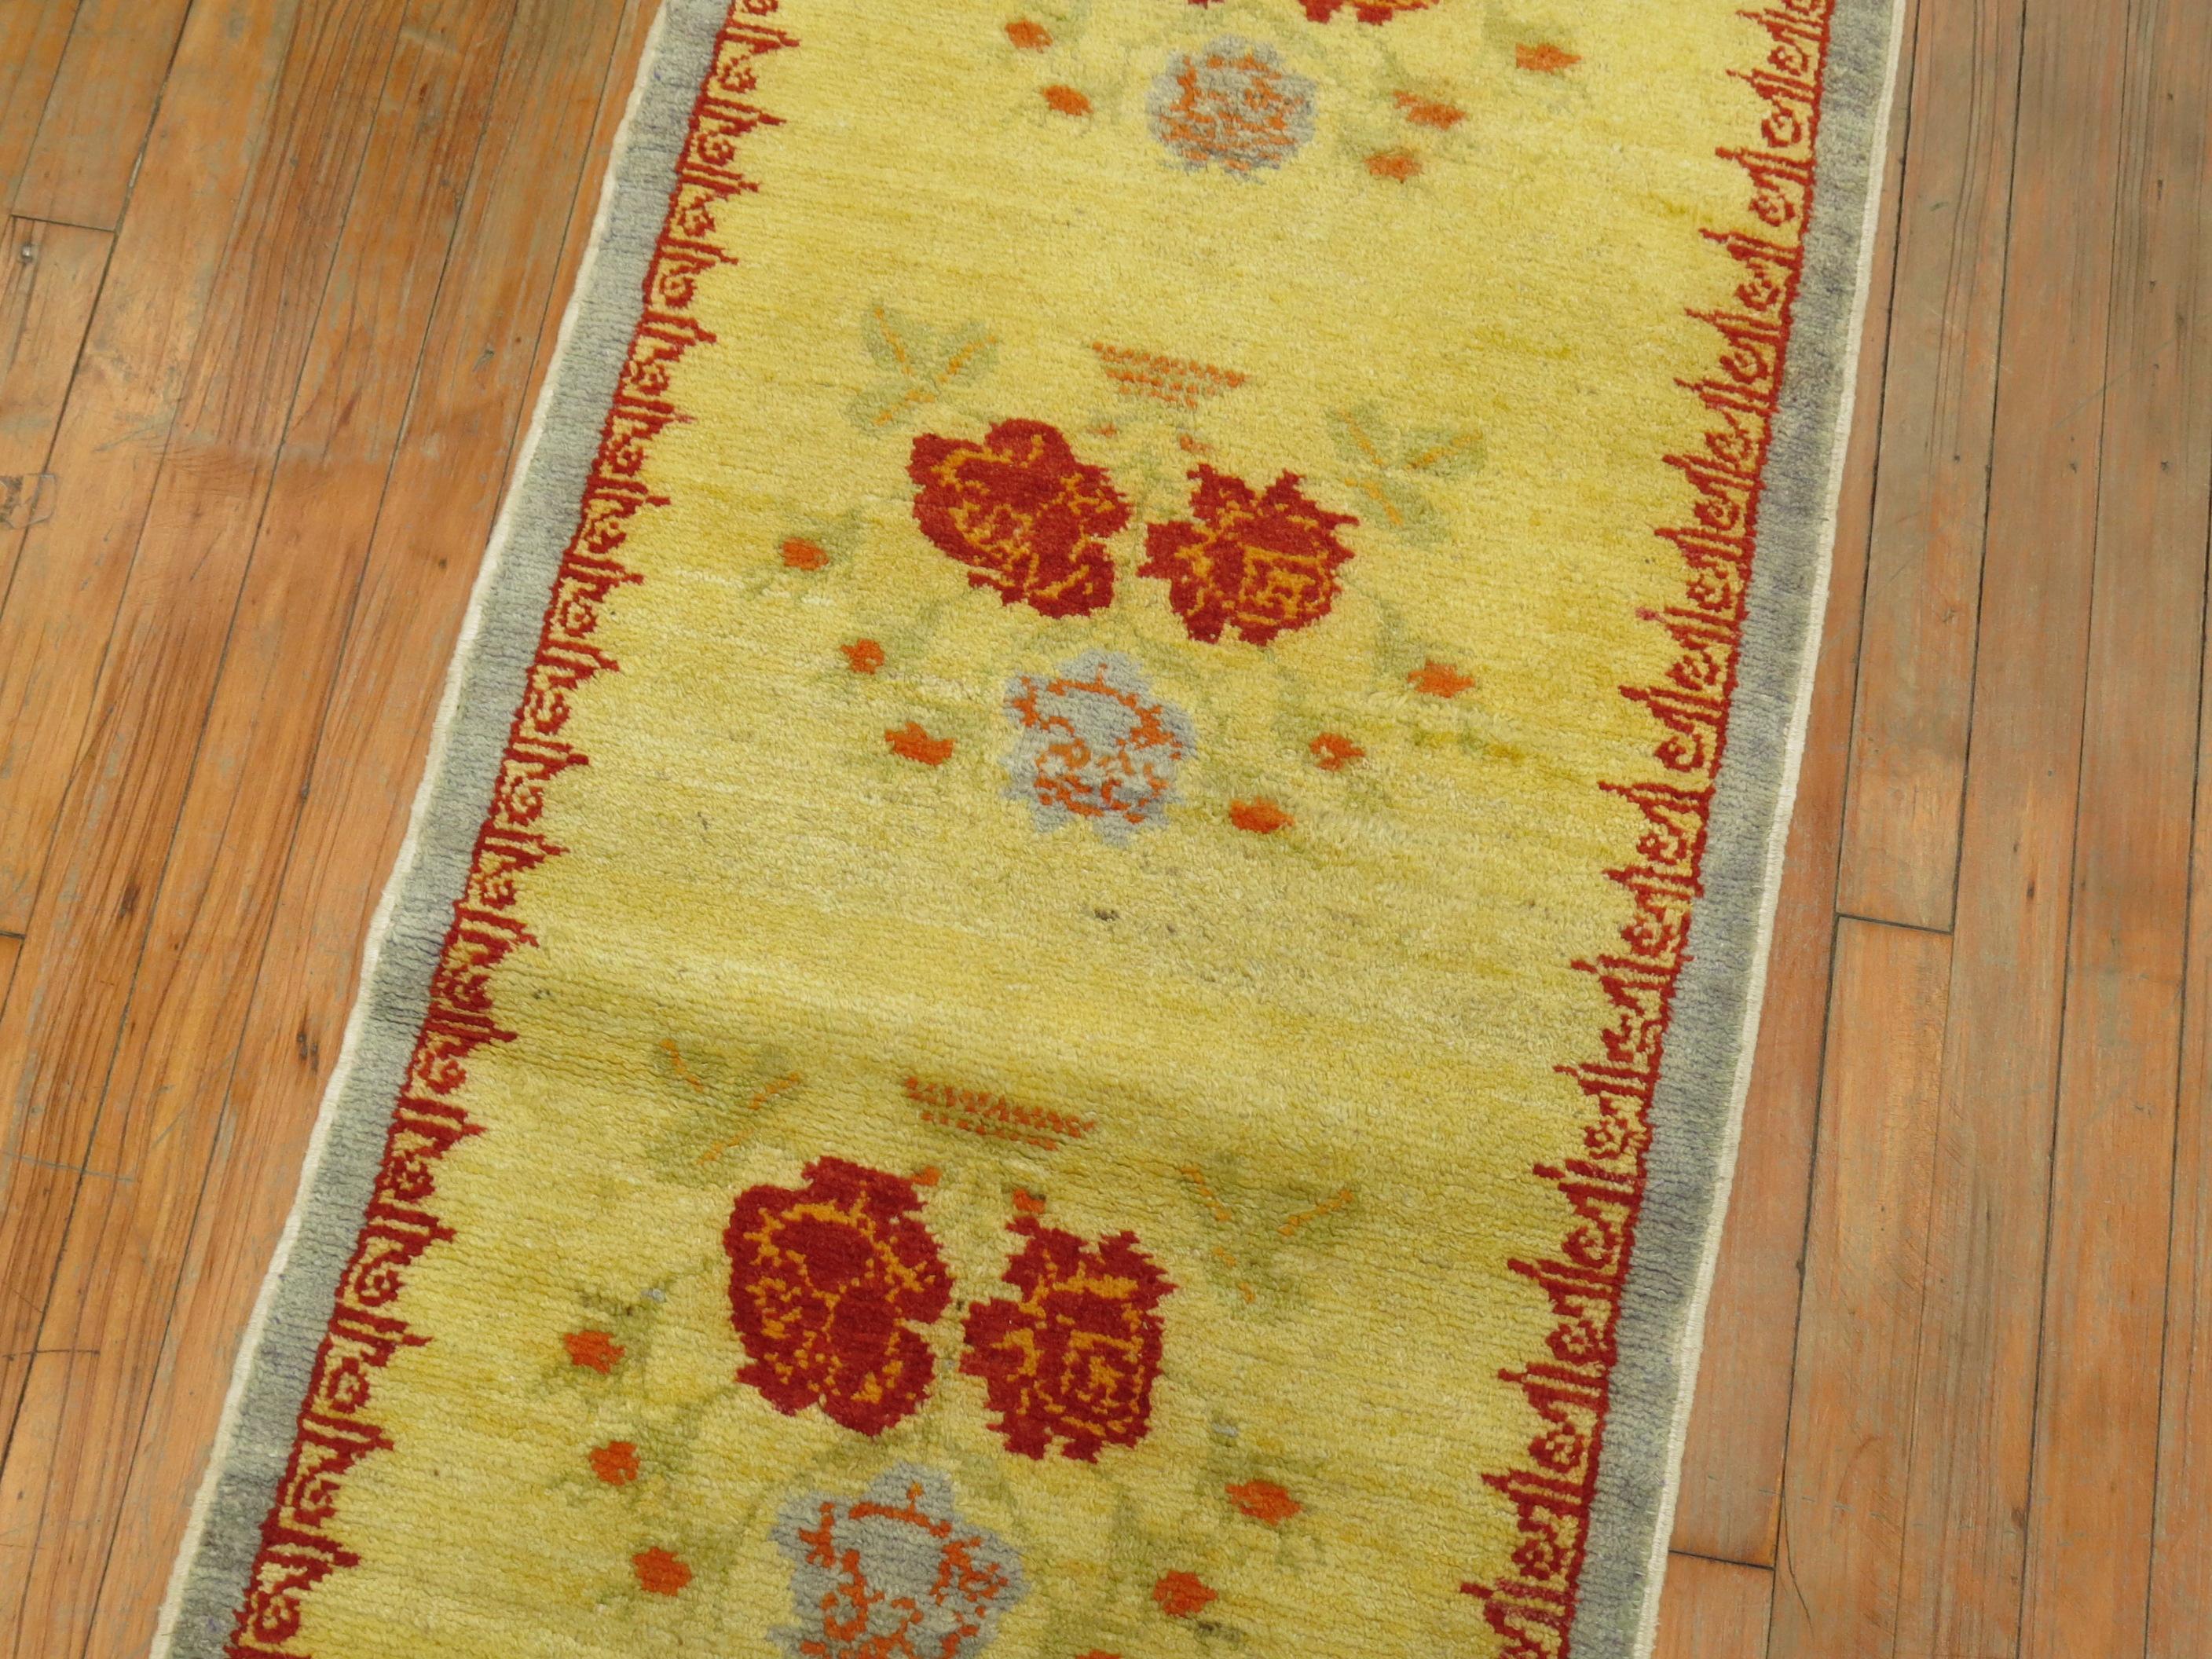 A one of a kind Turkish runner with running flowers on a bright yellow ground.